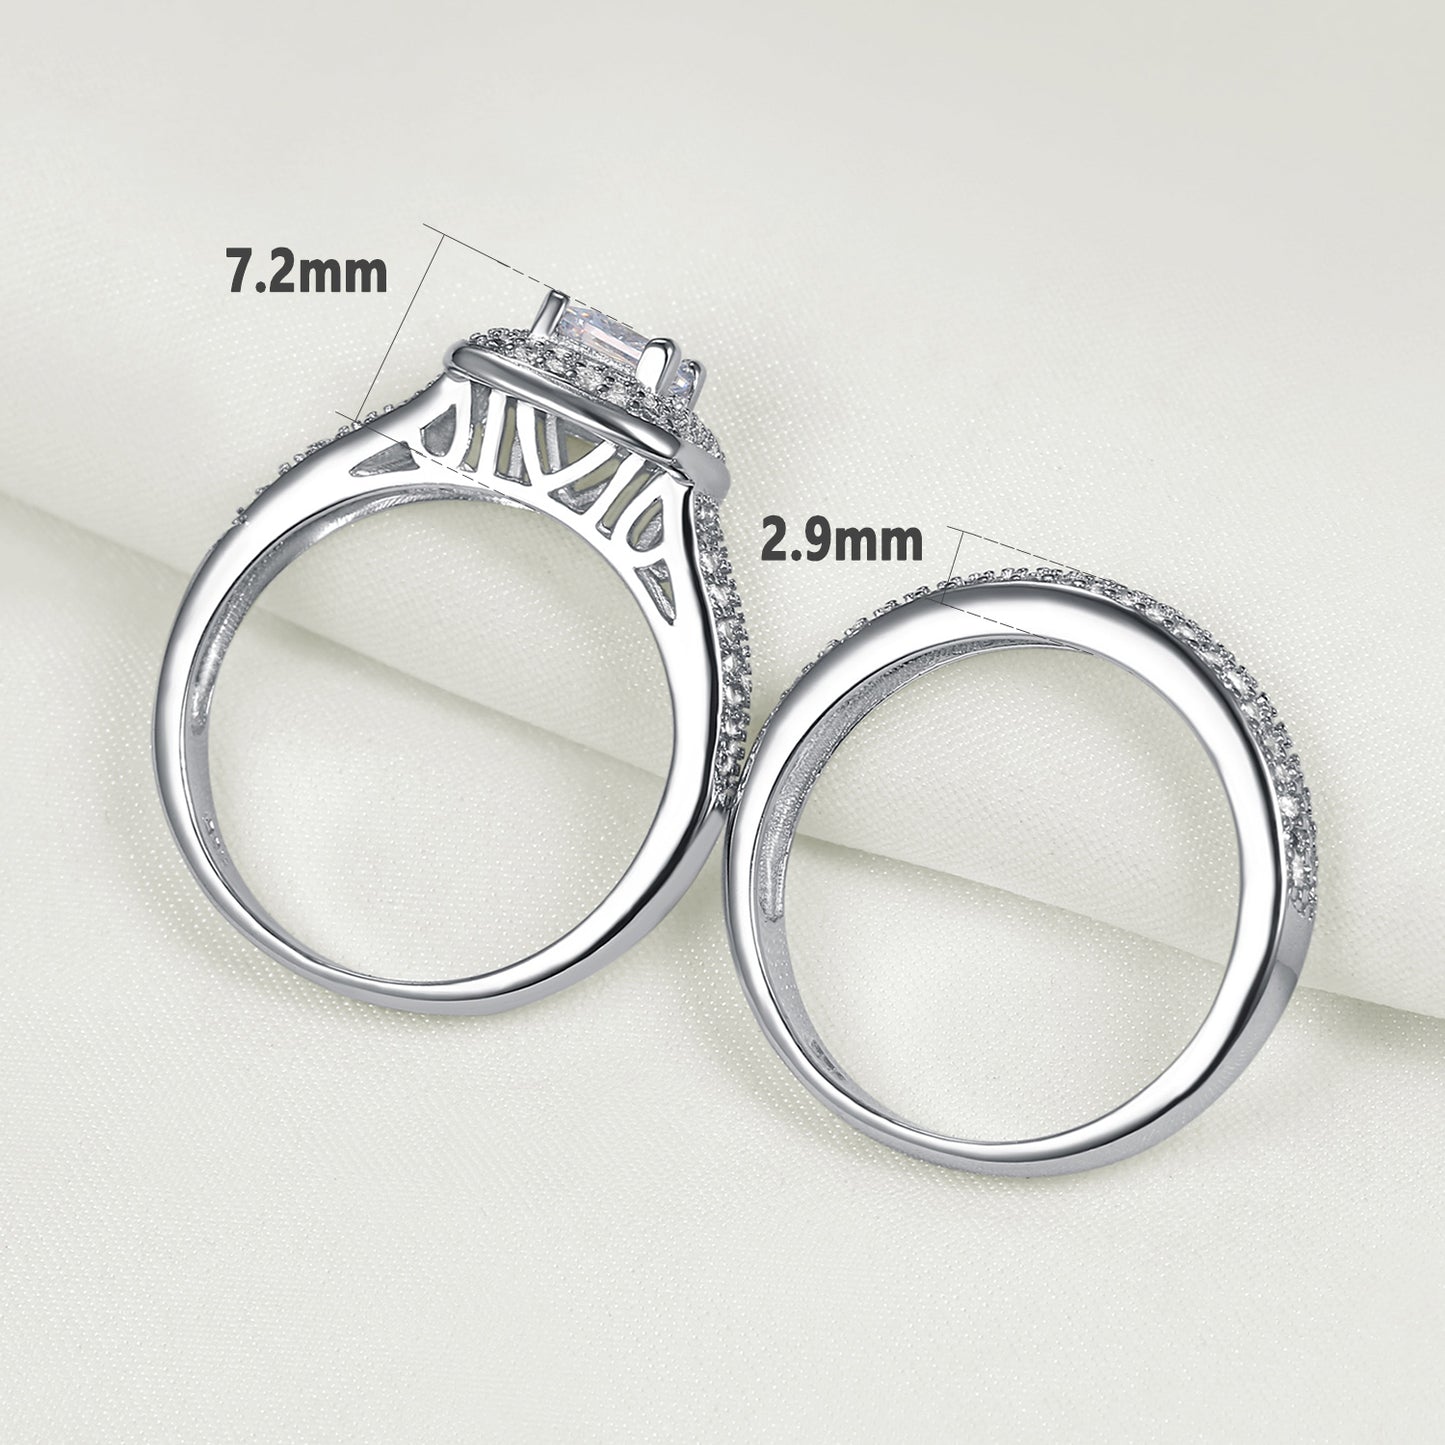 2 Pcs Classic Wedding Rings For Women 925 Sterling Silver Jewelry